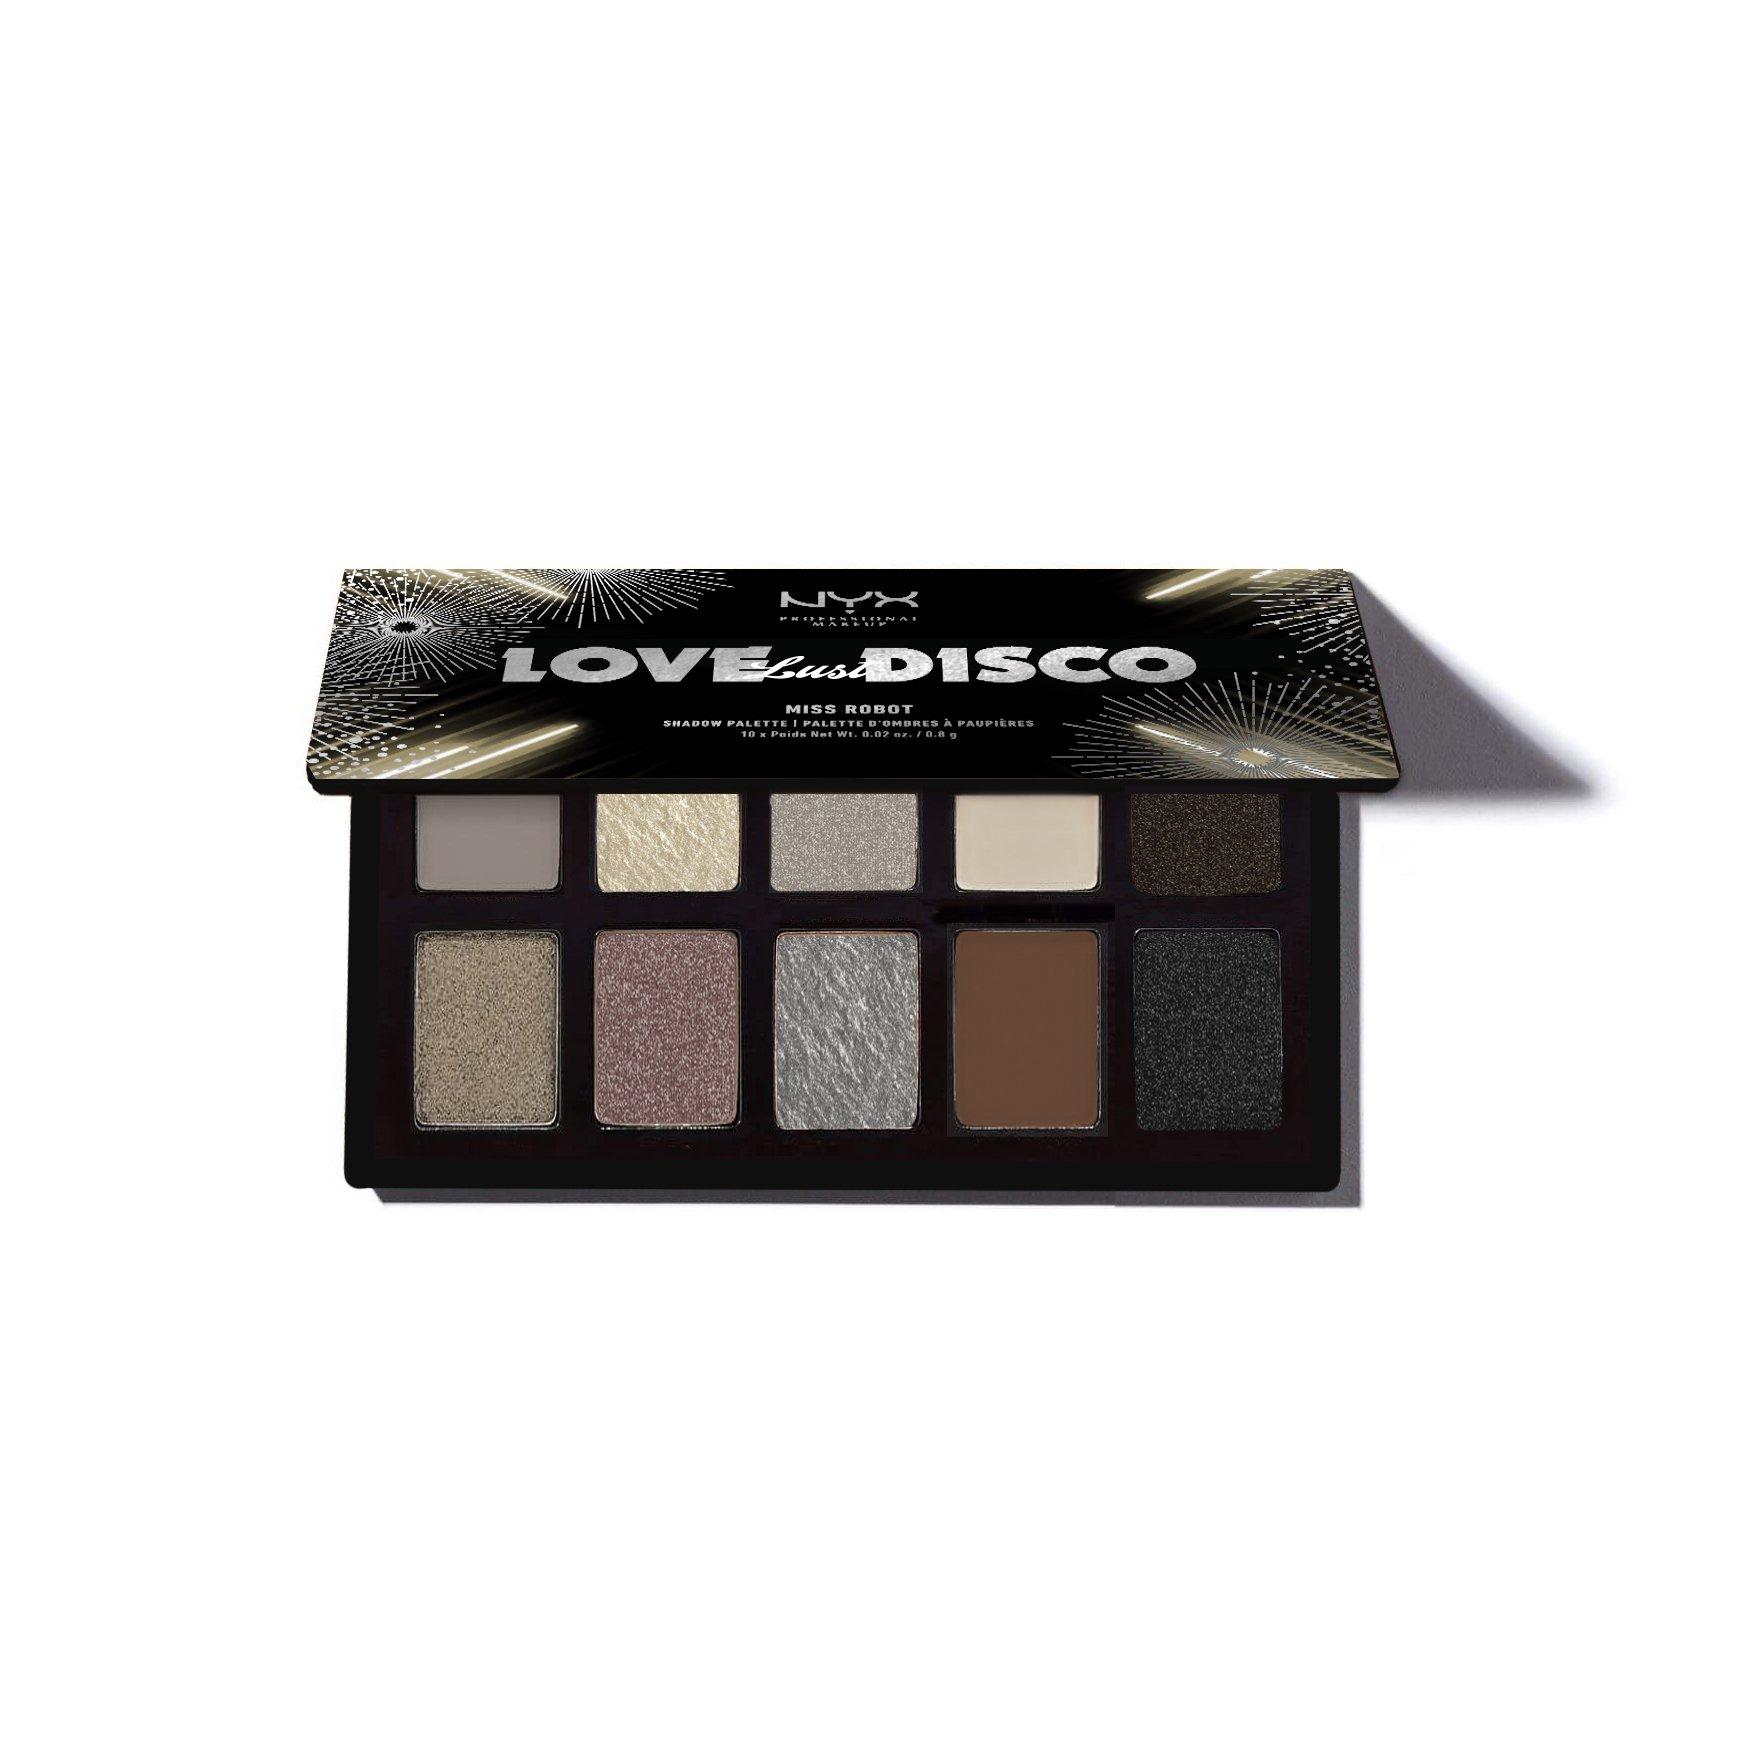 Image of NYX-PROFESSIONAL-MAKEUP Love Lust Disco Eyeshadow Palette 02